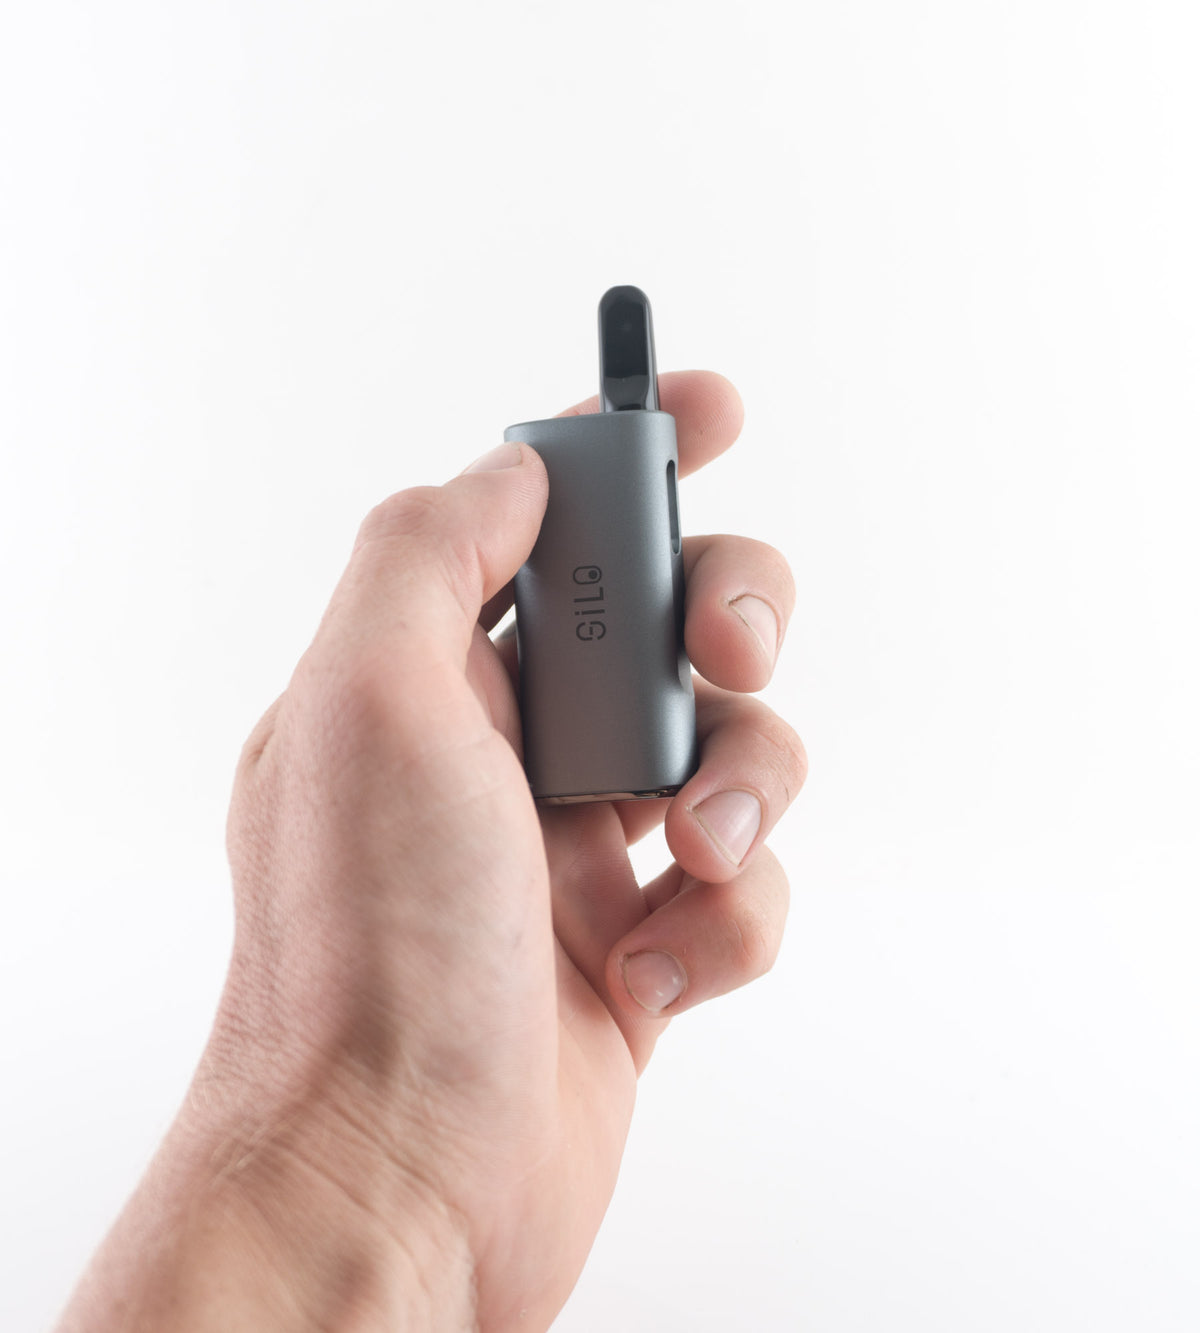 CCELL Silo 510 vape battery held in hand.